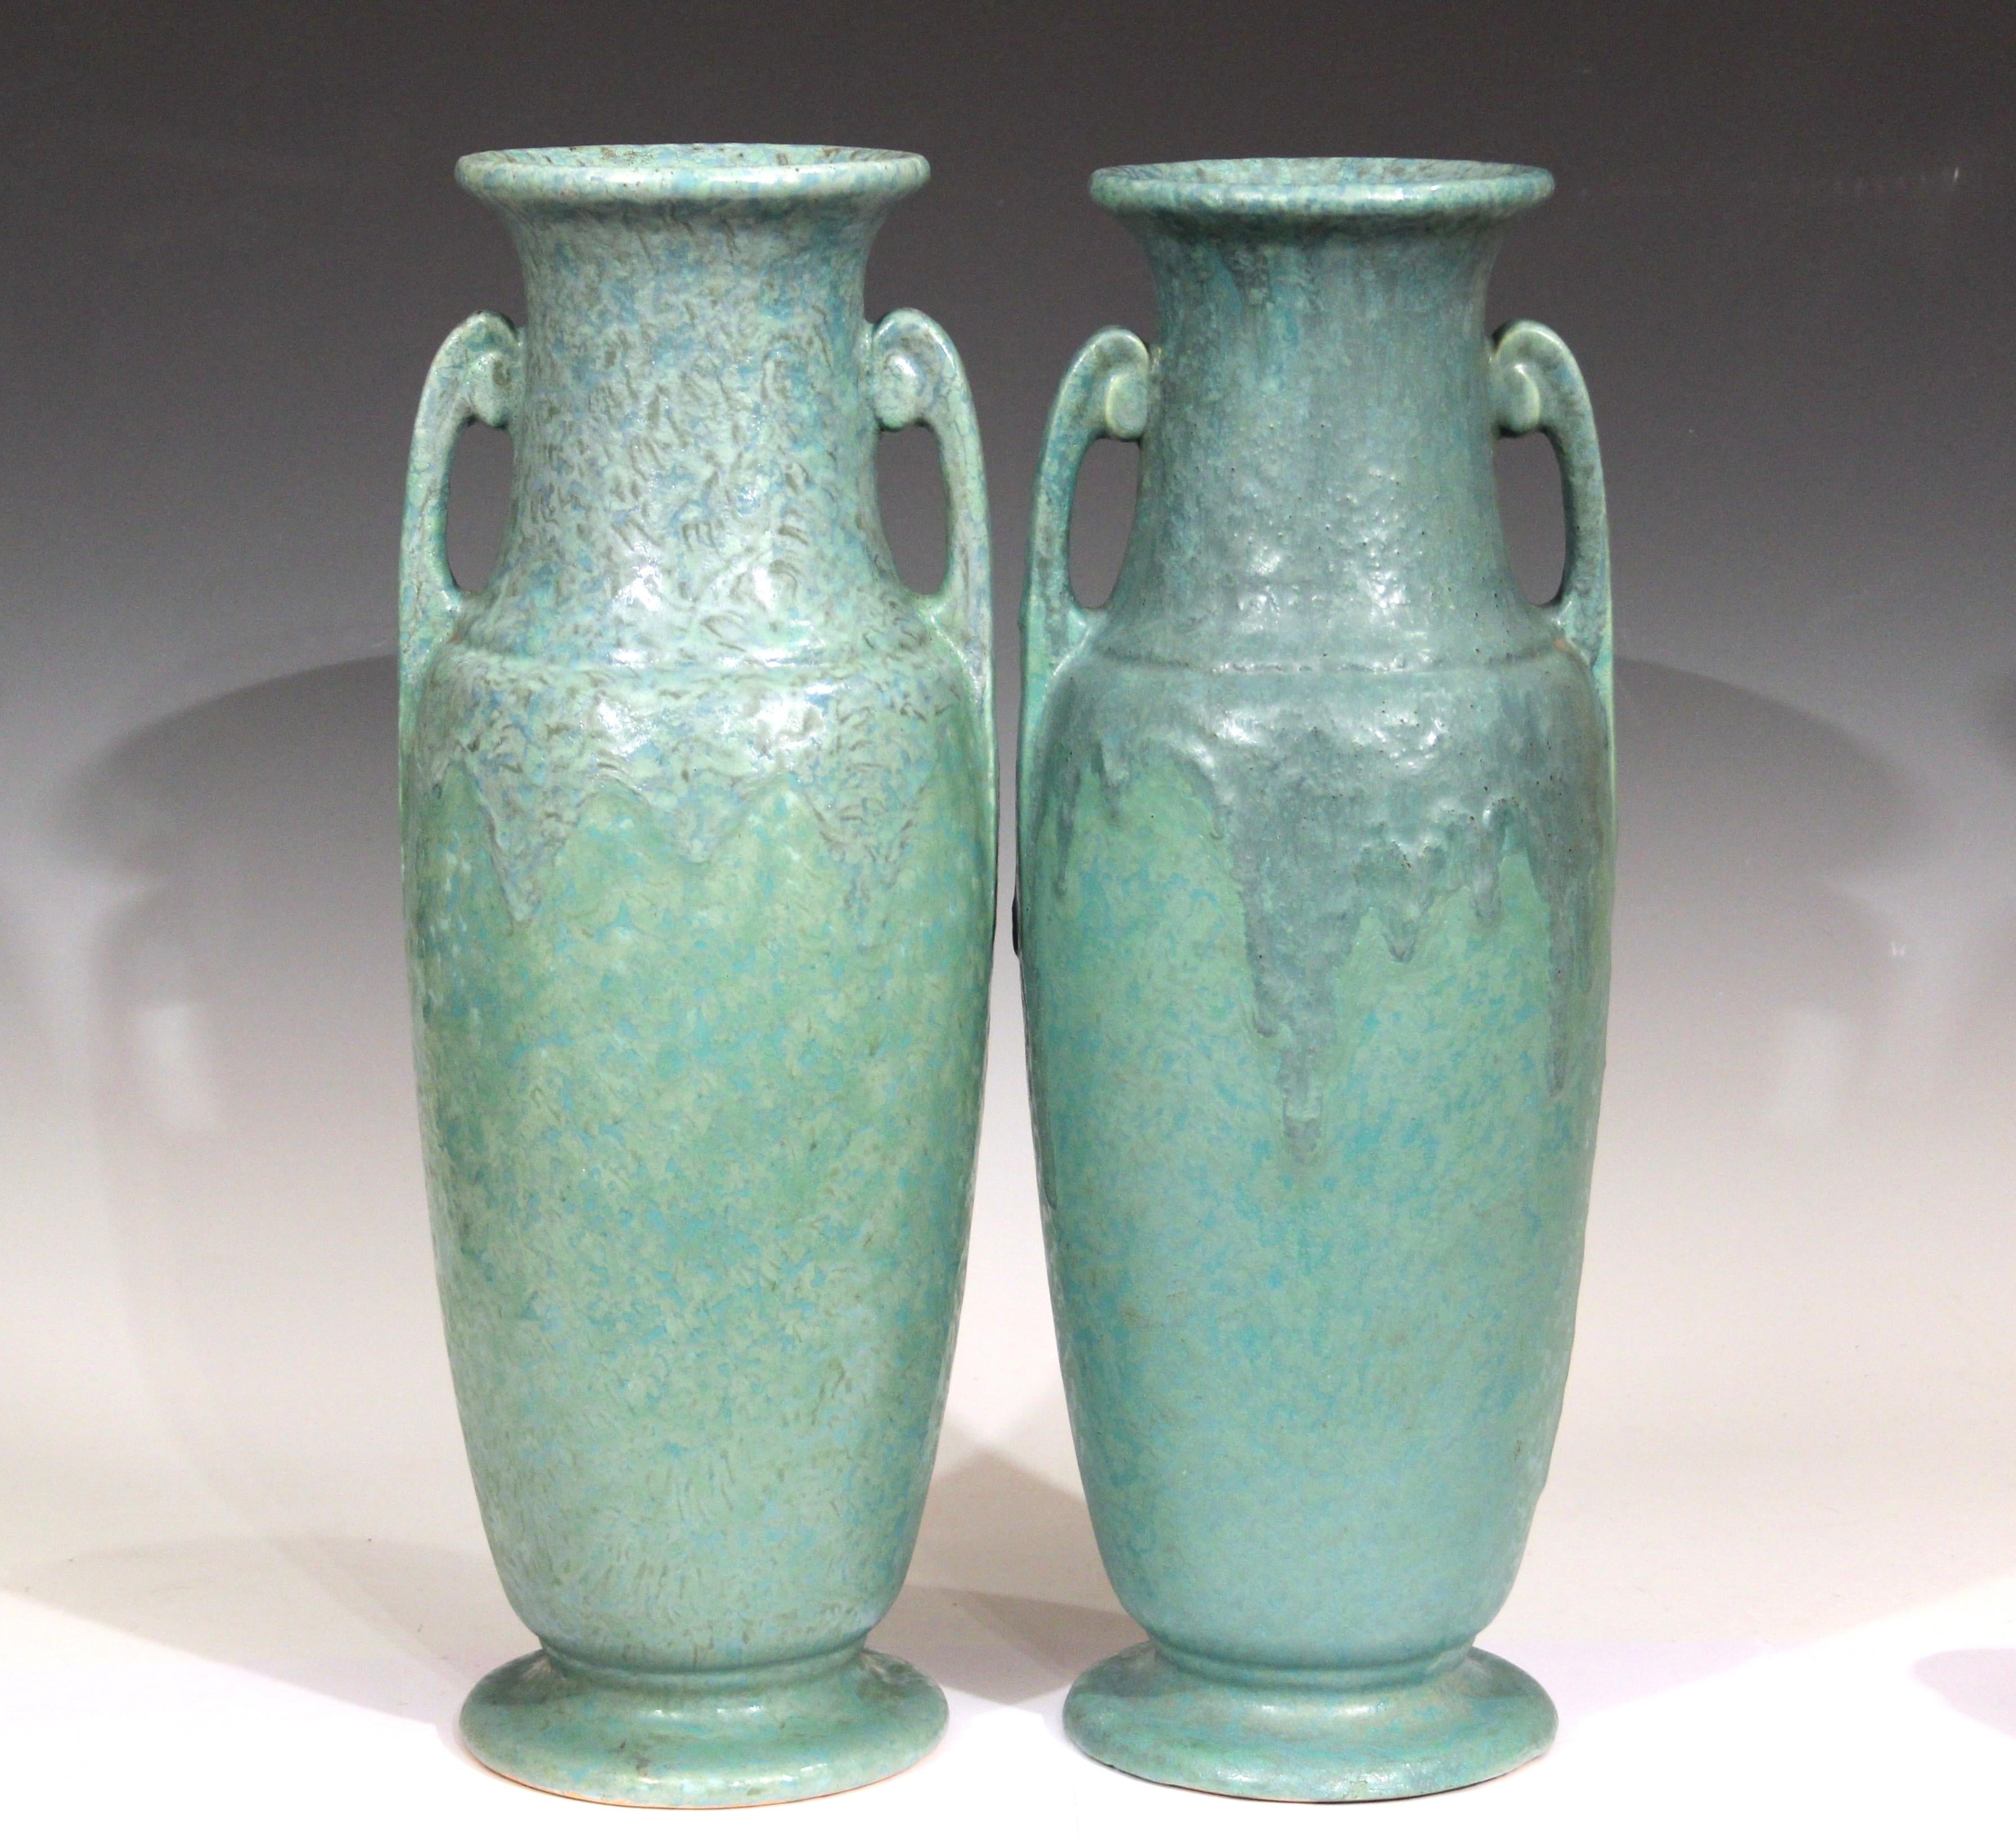 Spectacular pair of Roseville Carnelian II vases with variegated green and blue drip glaze, circa early 20th century. 18 1/4